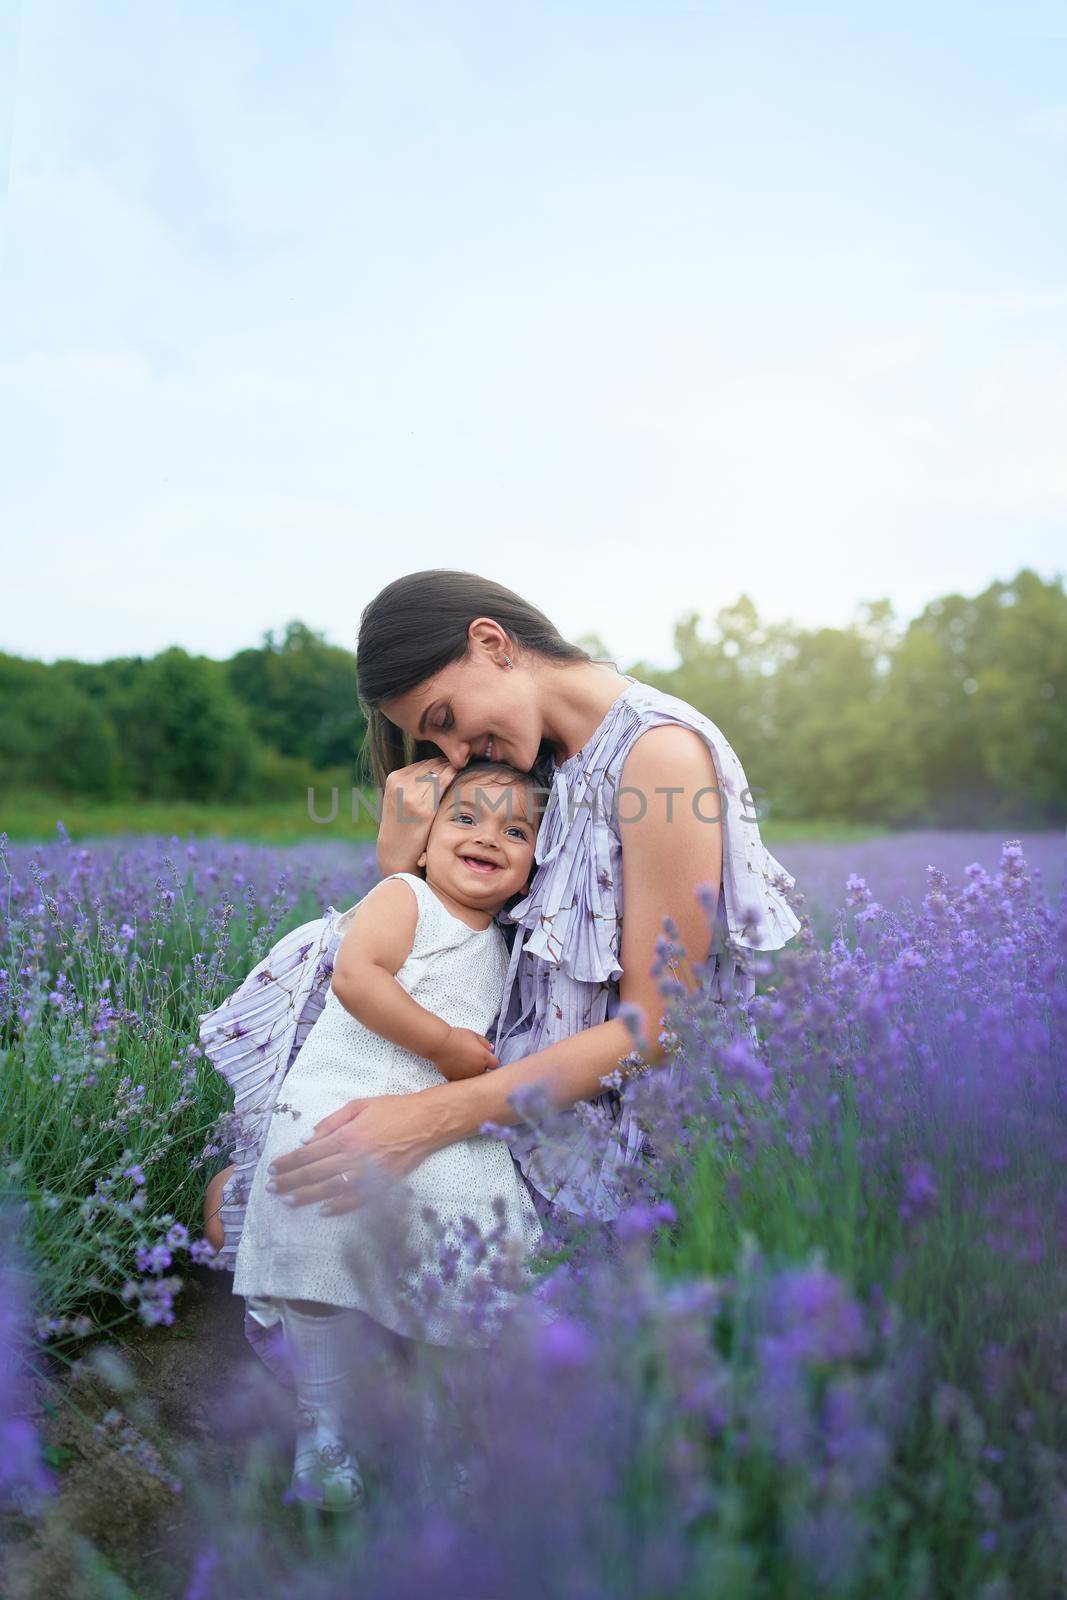 Side view of young mother wearing dress sitting between beautiful purple flowers. Woman posing with little smiling baby daughter on knees in lavender field. Concept of nature, motherhood.